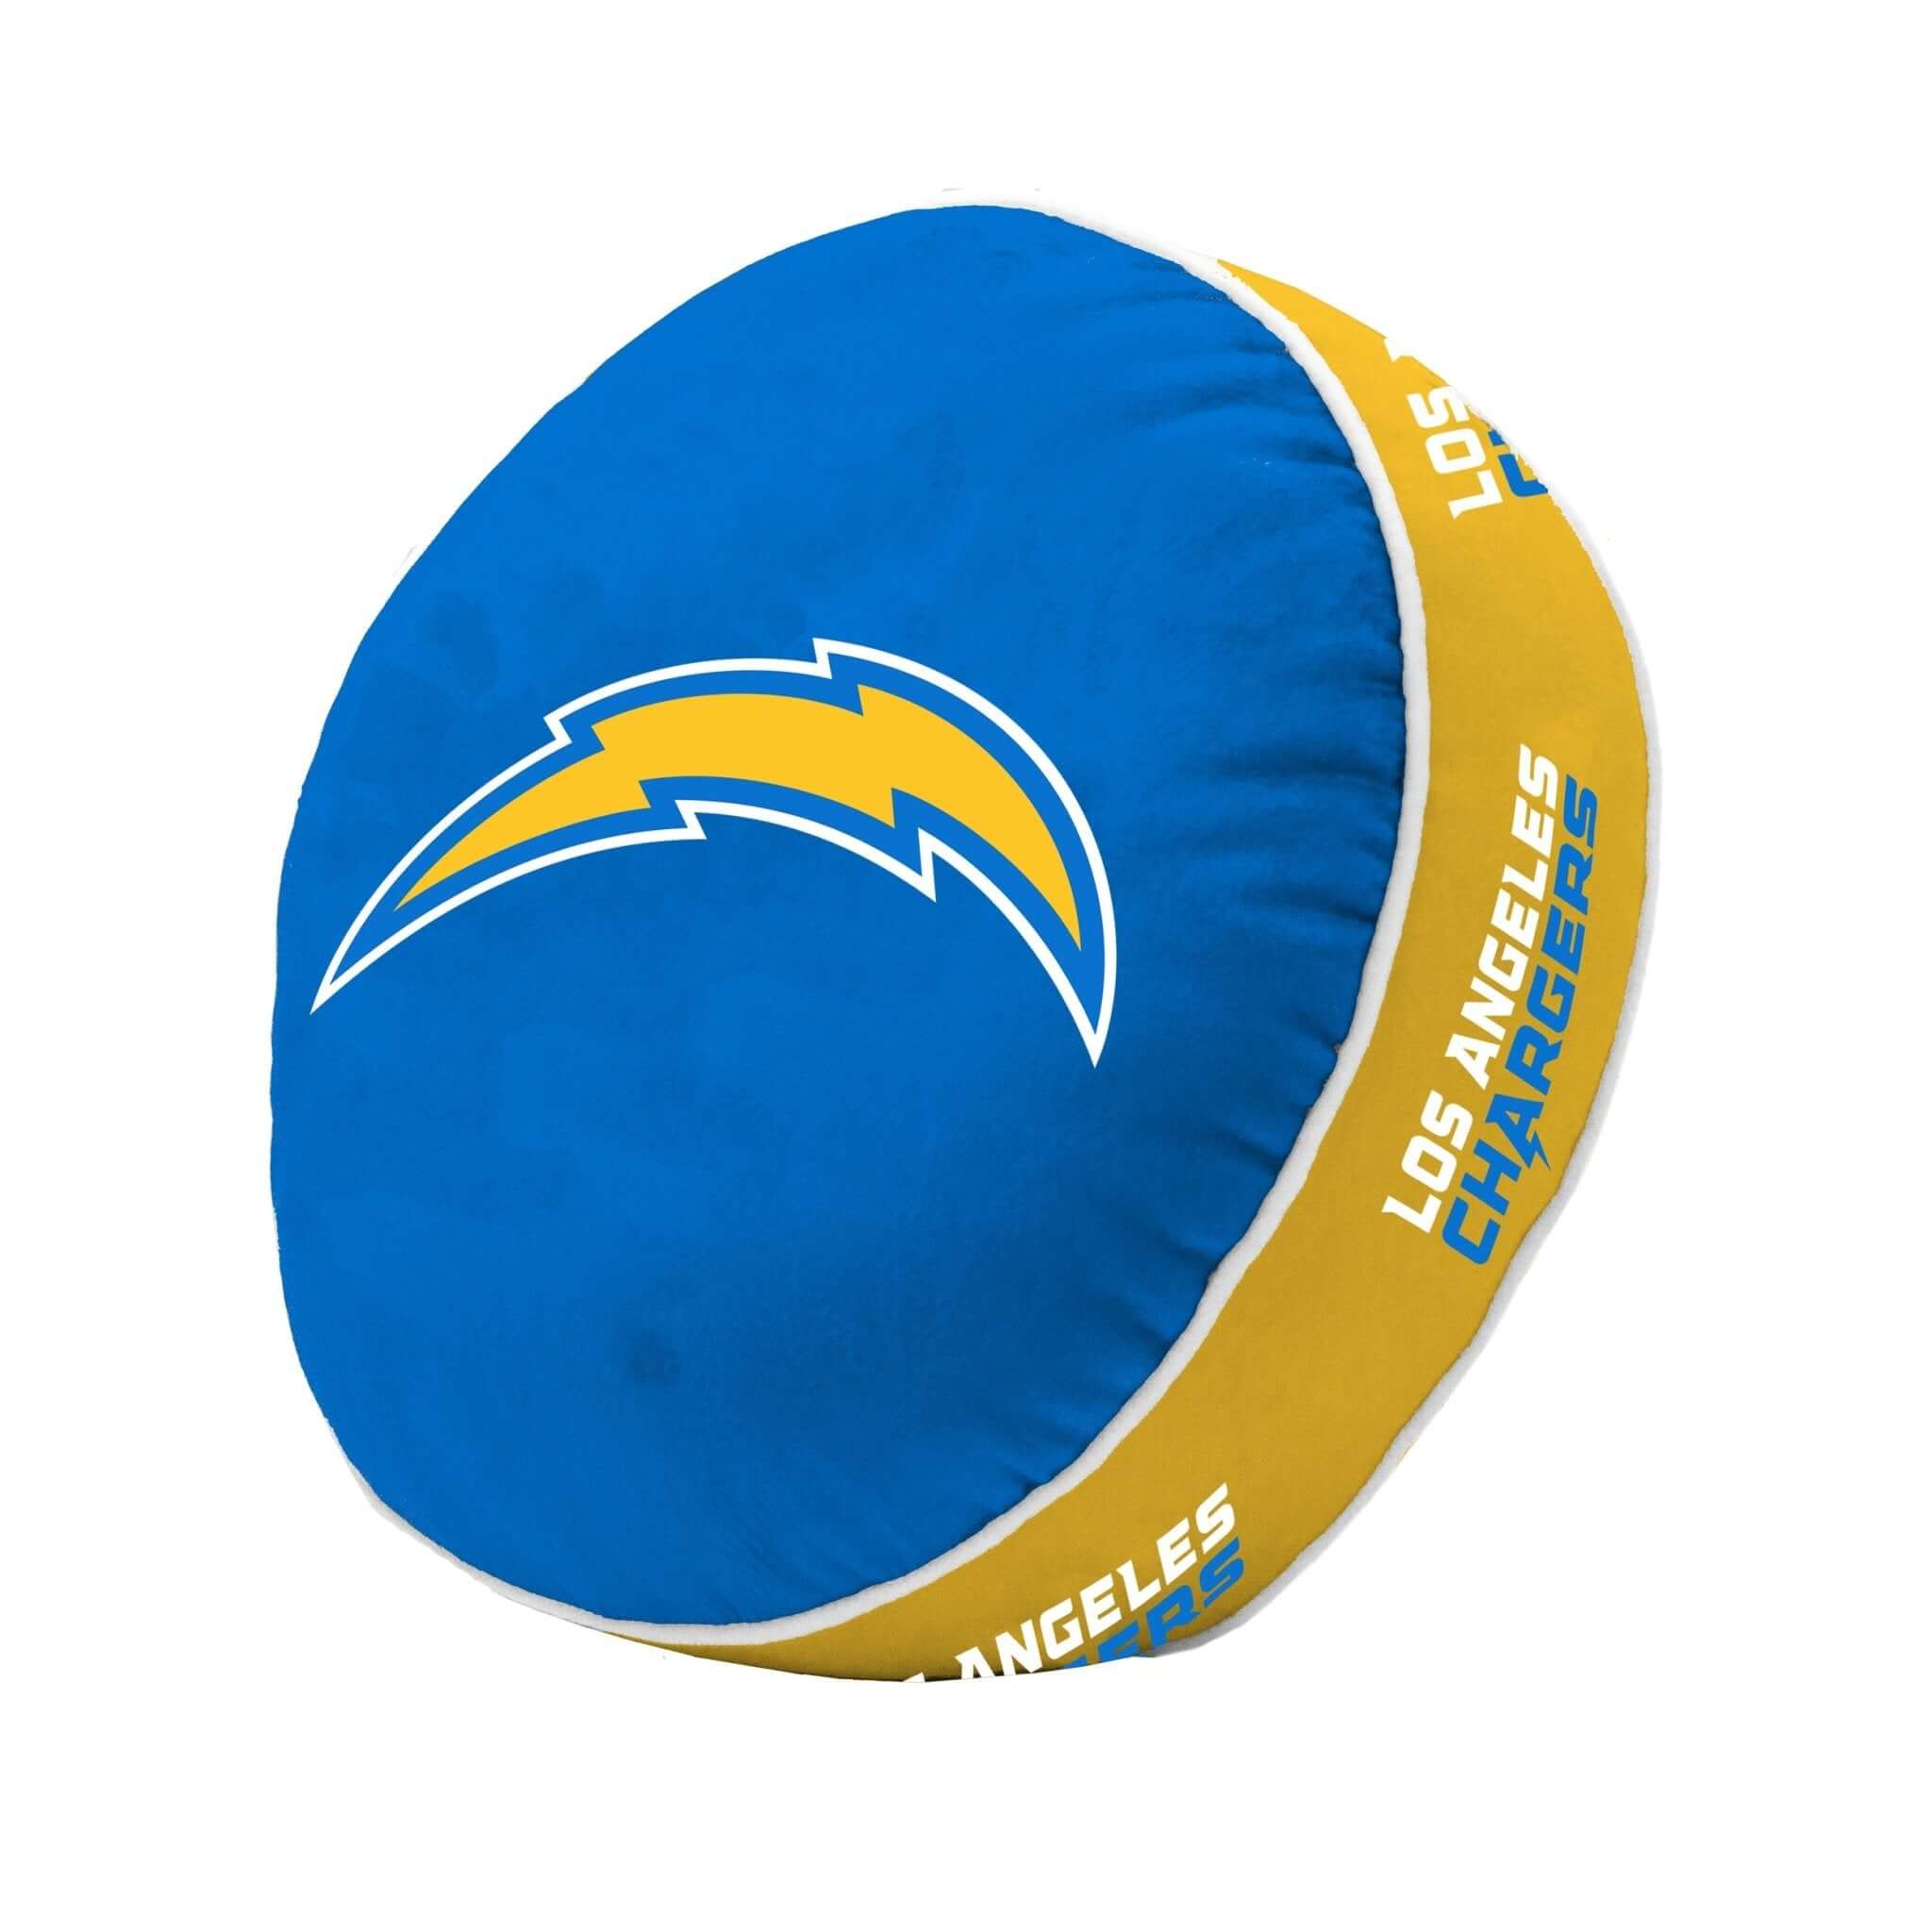 Los Angeles Rams 16'' x 16'' Jersey Pillow - Blue